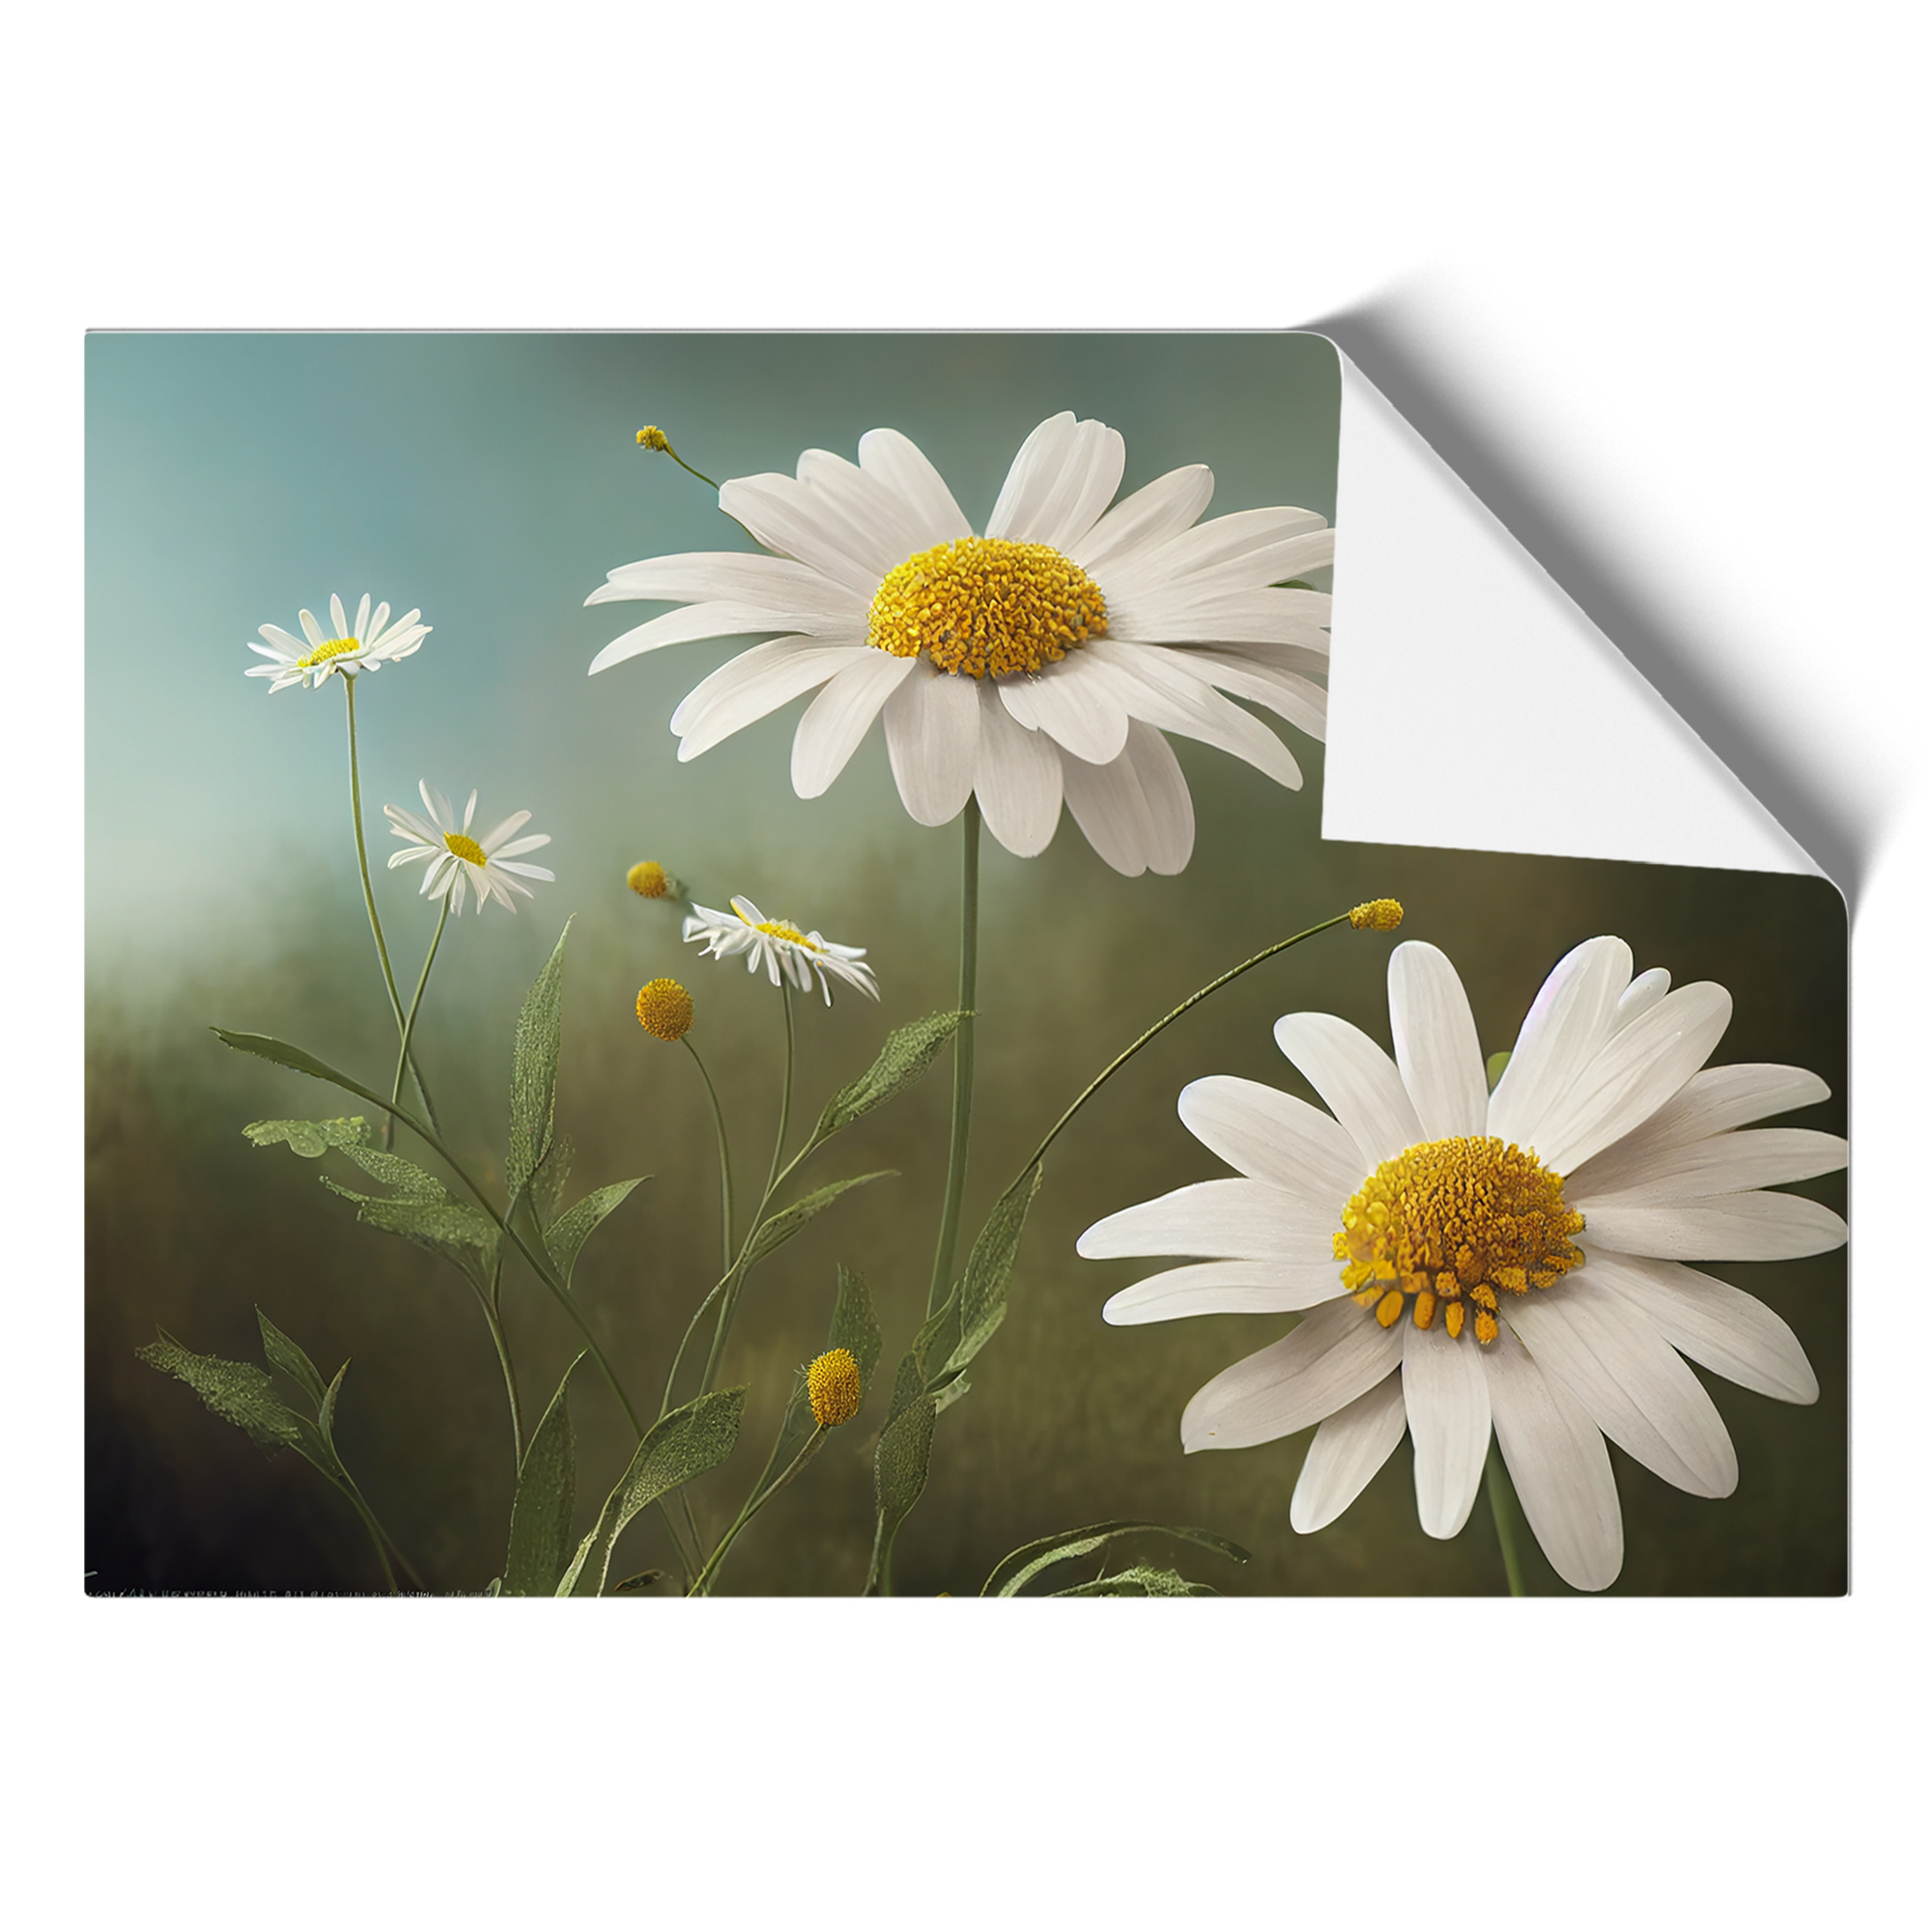 Large Flowers | Home Decor eBay Artsy Wall Framed Picture Art Print Daisy Poster